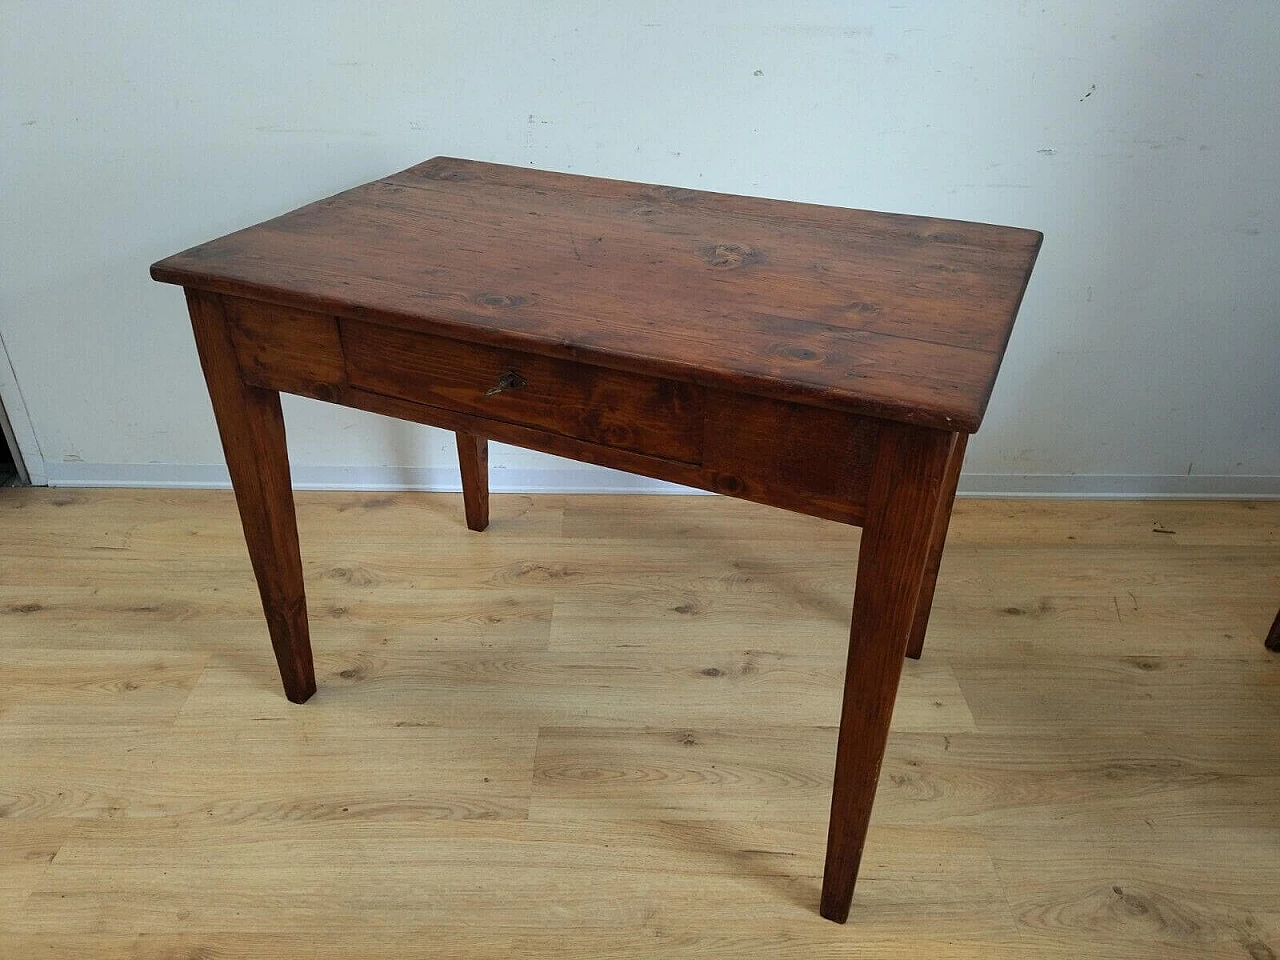 Walnut-stained solid spruce desk, late 19th century 9